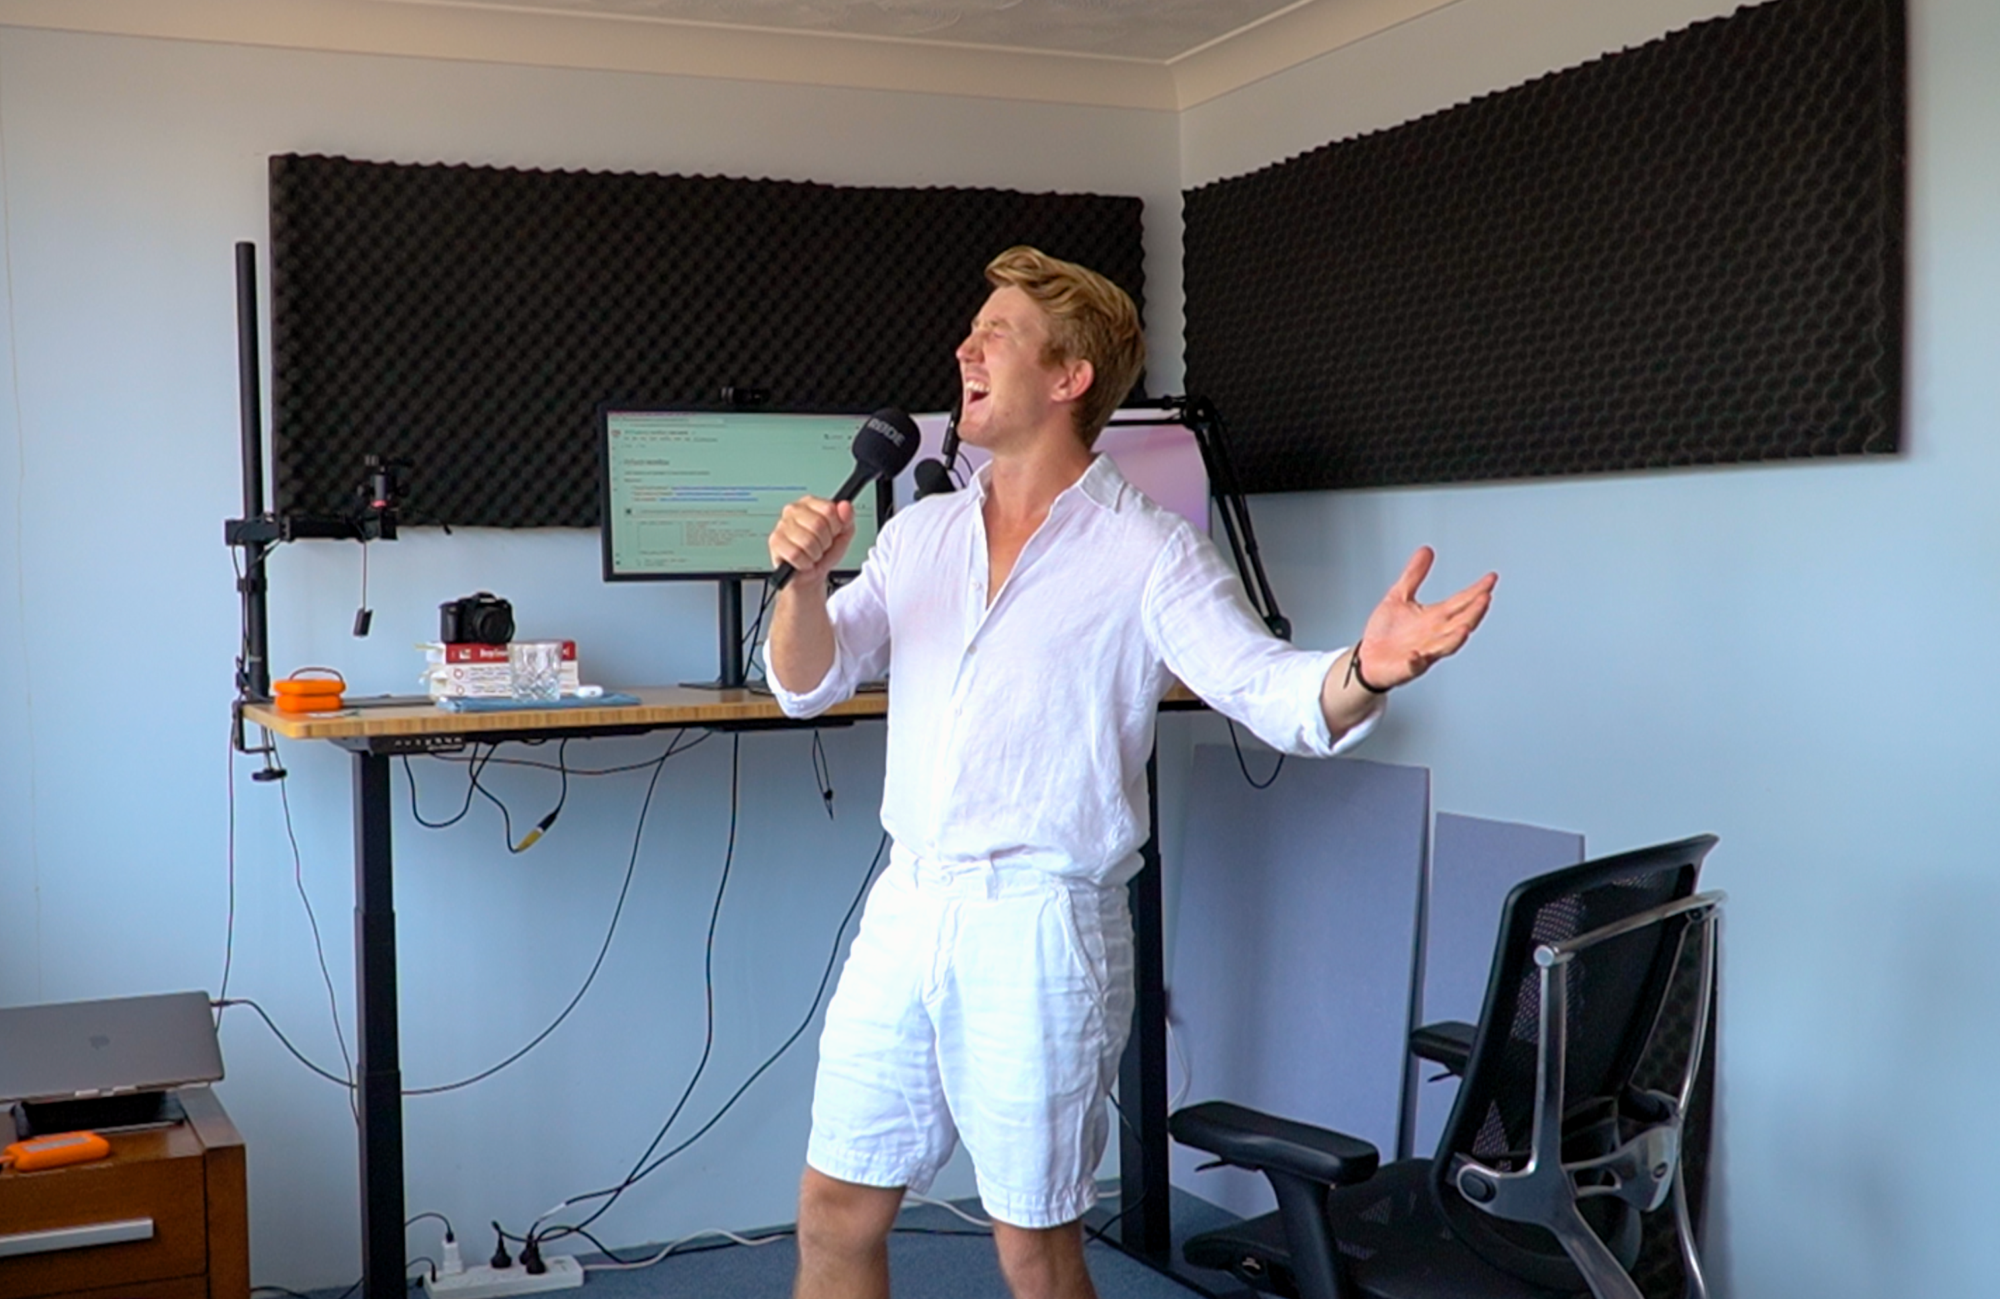 man standing in computer studio with microphone in hand and screens behind singing a song